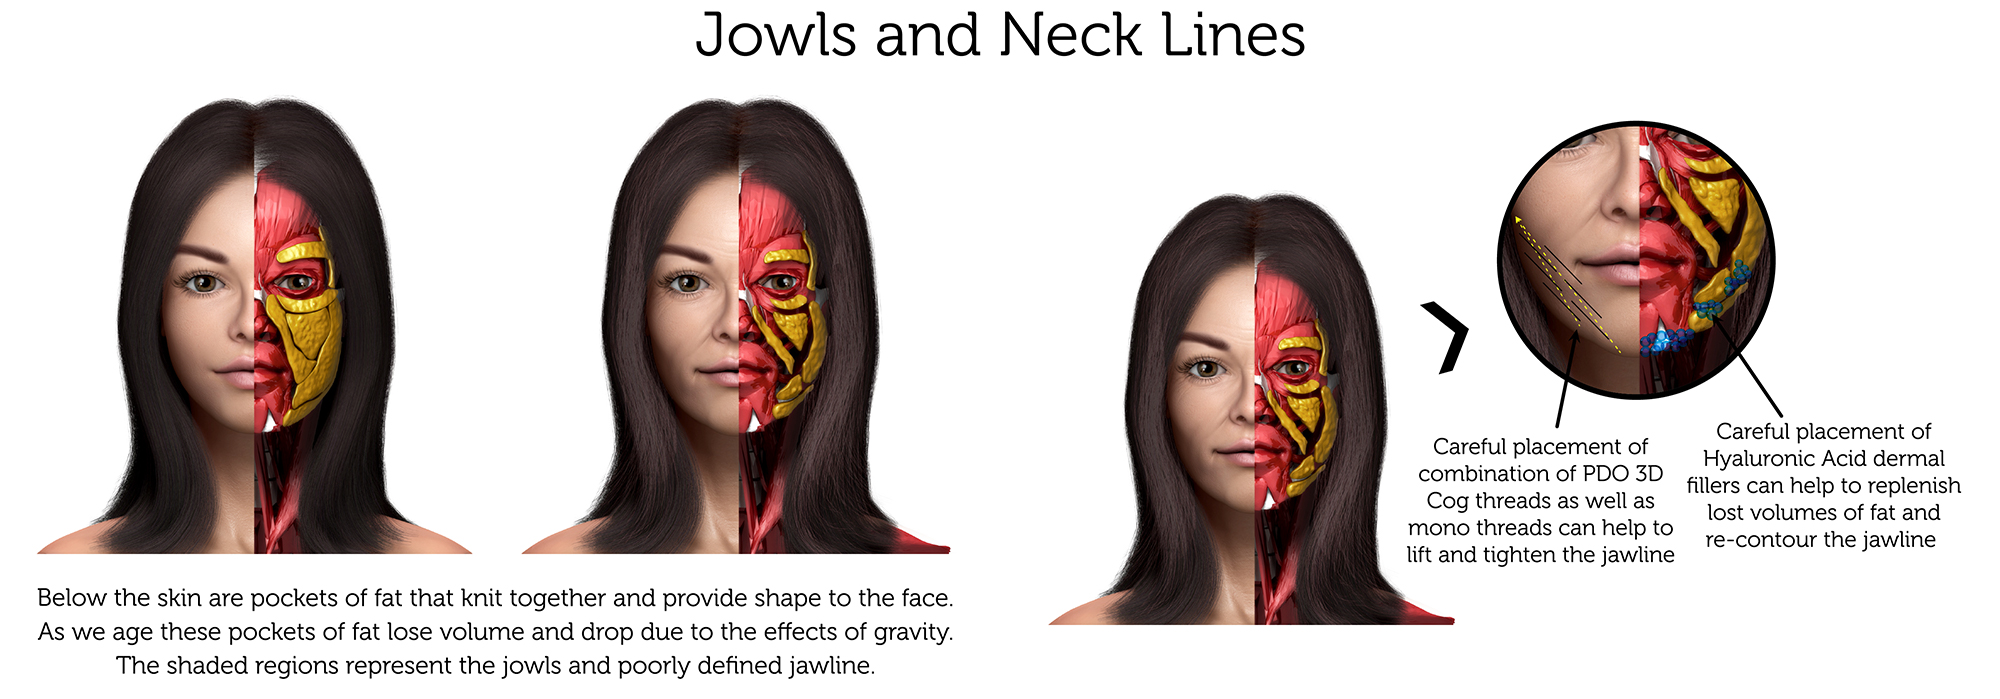 Jowls and Neck Lines (Female) a-01